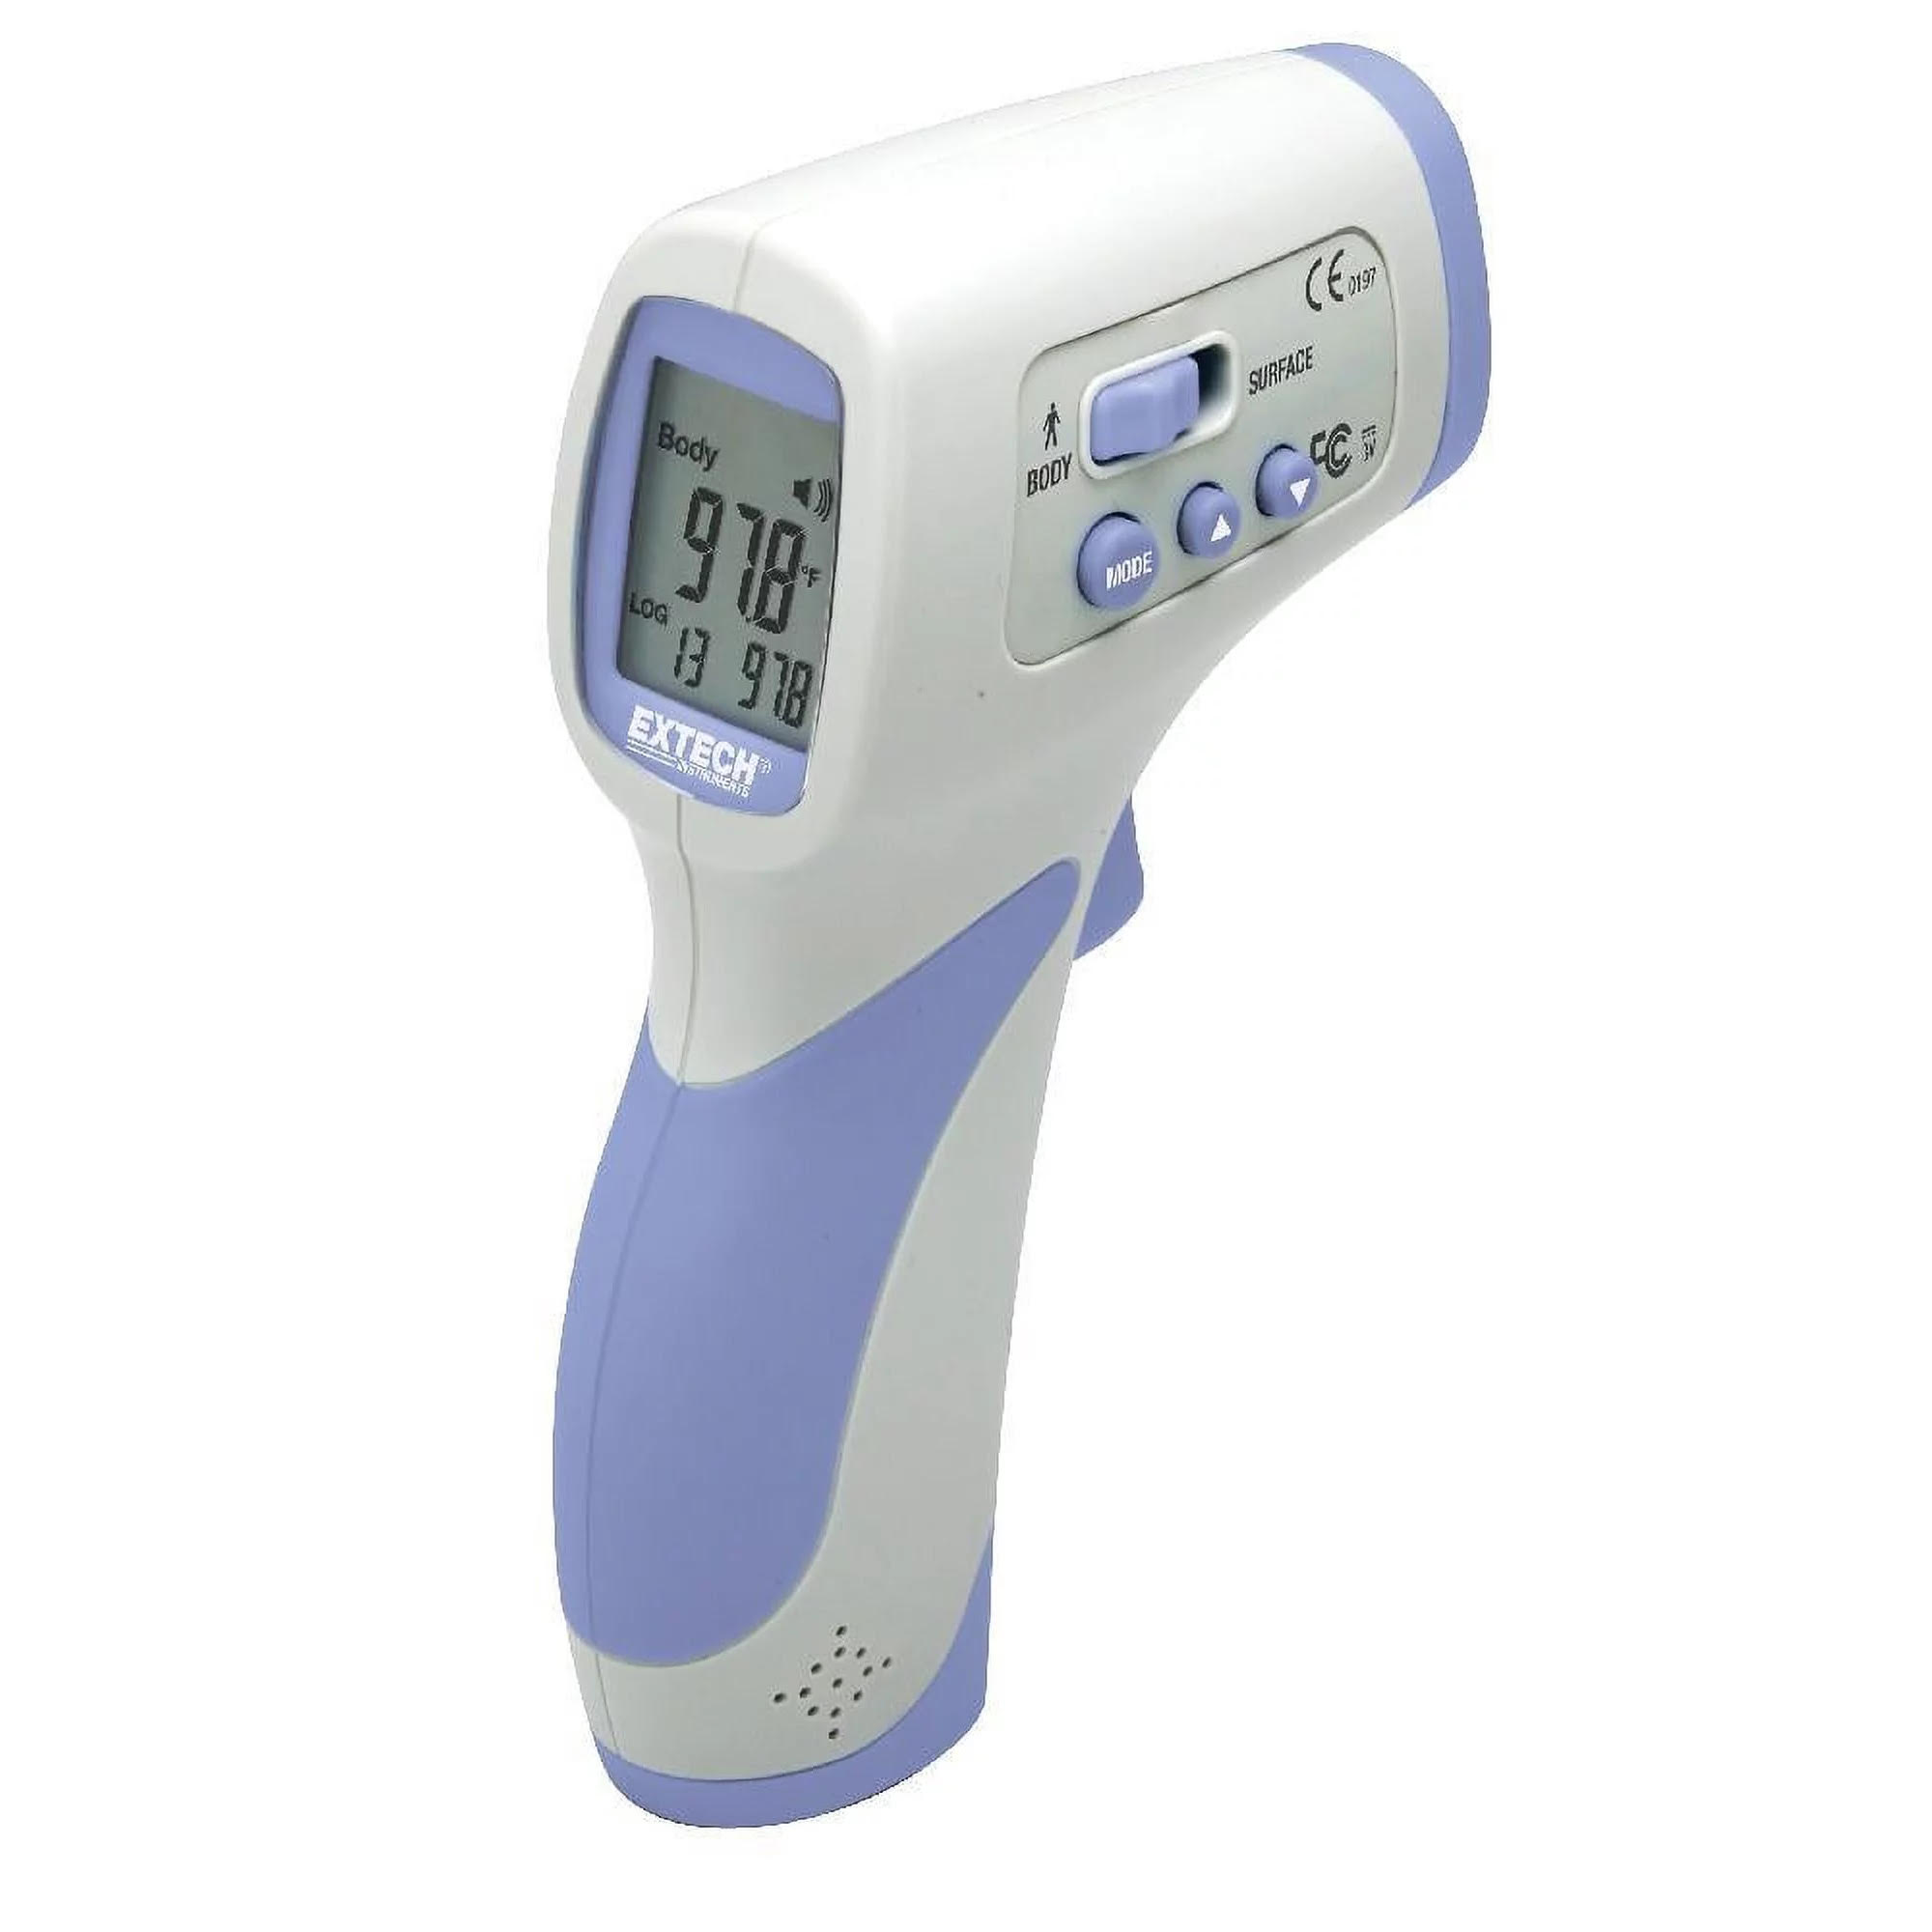 Extech-IR200 Non-Contact Forehead Infrared Thermometer USA